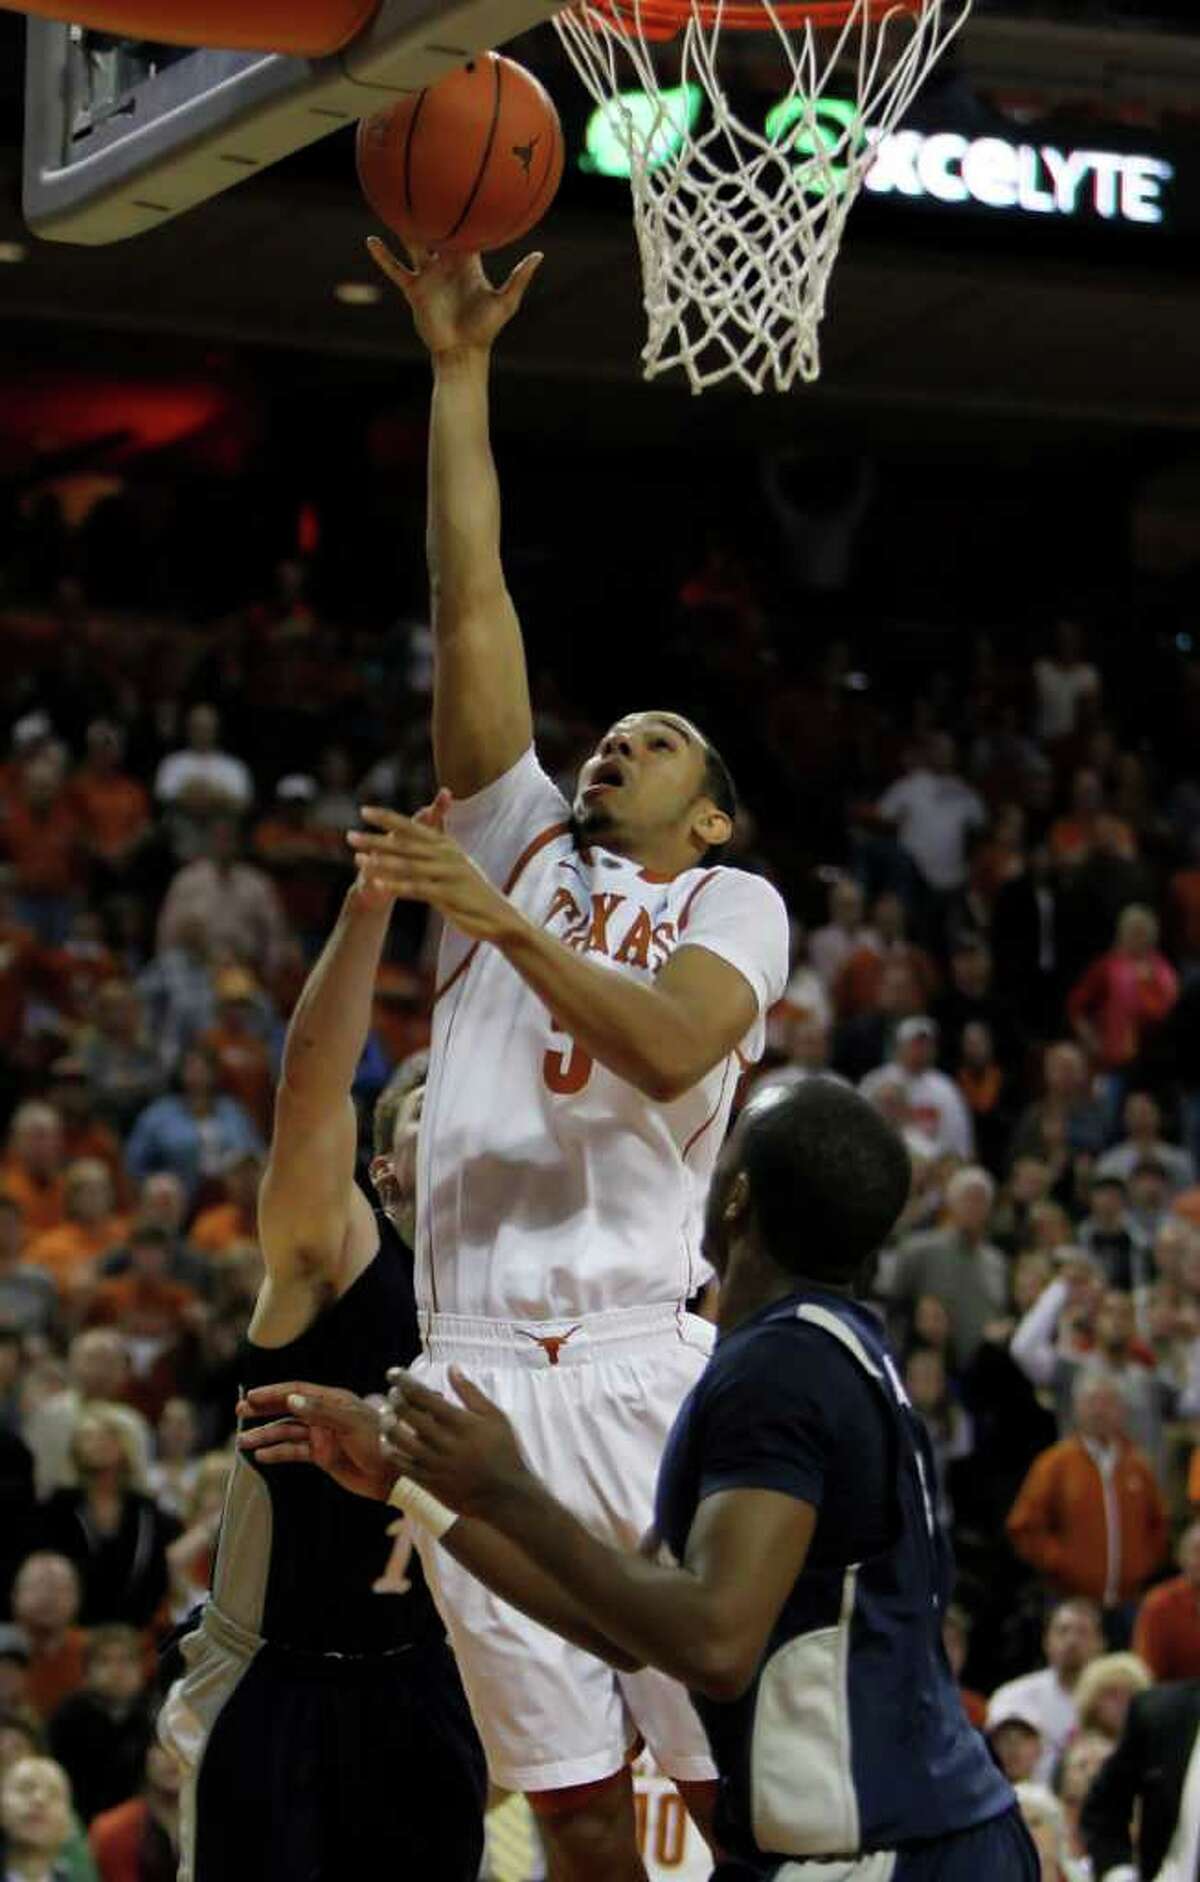 Texas' Cory Joseph (5) goes for a shot against Rice during an NCAA college basketball game in Austin, Texas, Saturday, Nov. 27, 2010. Joseph was Texas high-scorer with 14 points. Texas defeated Rice 62-59. (AP Photo/Erich Schlegel)